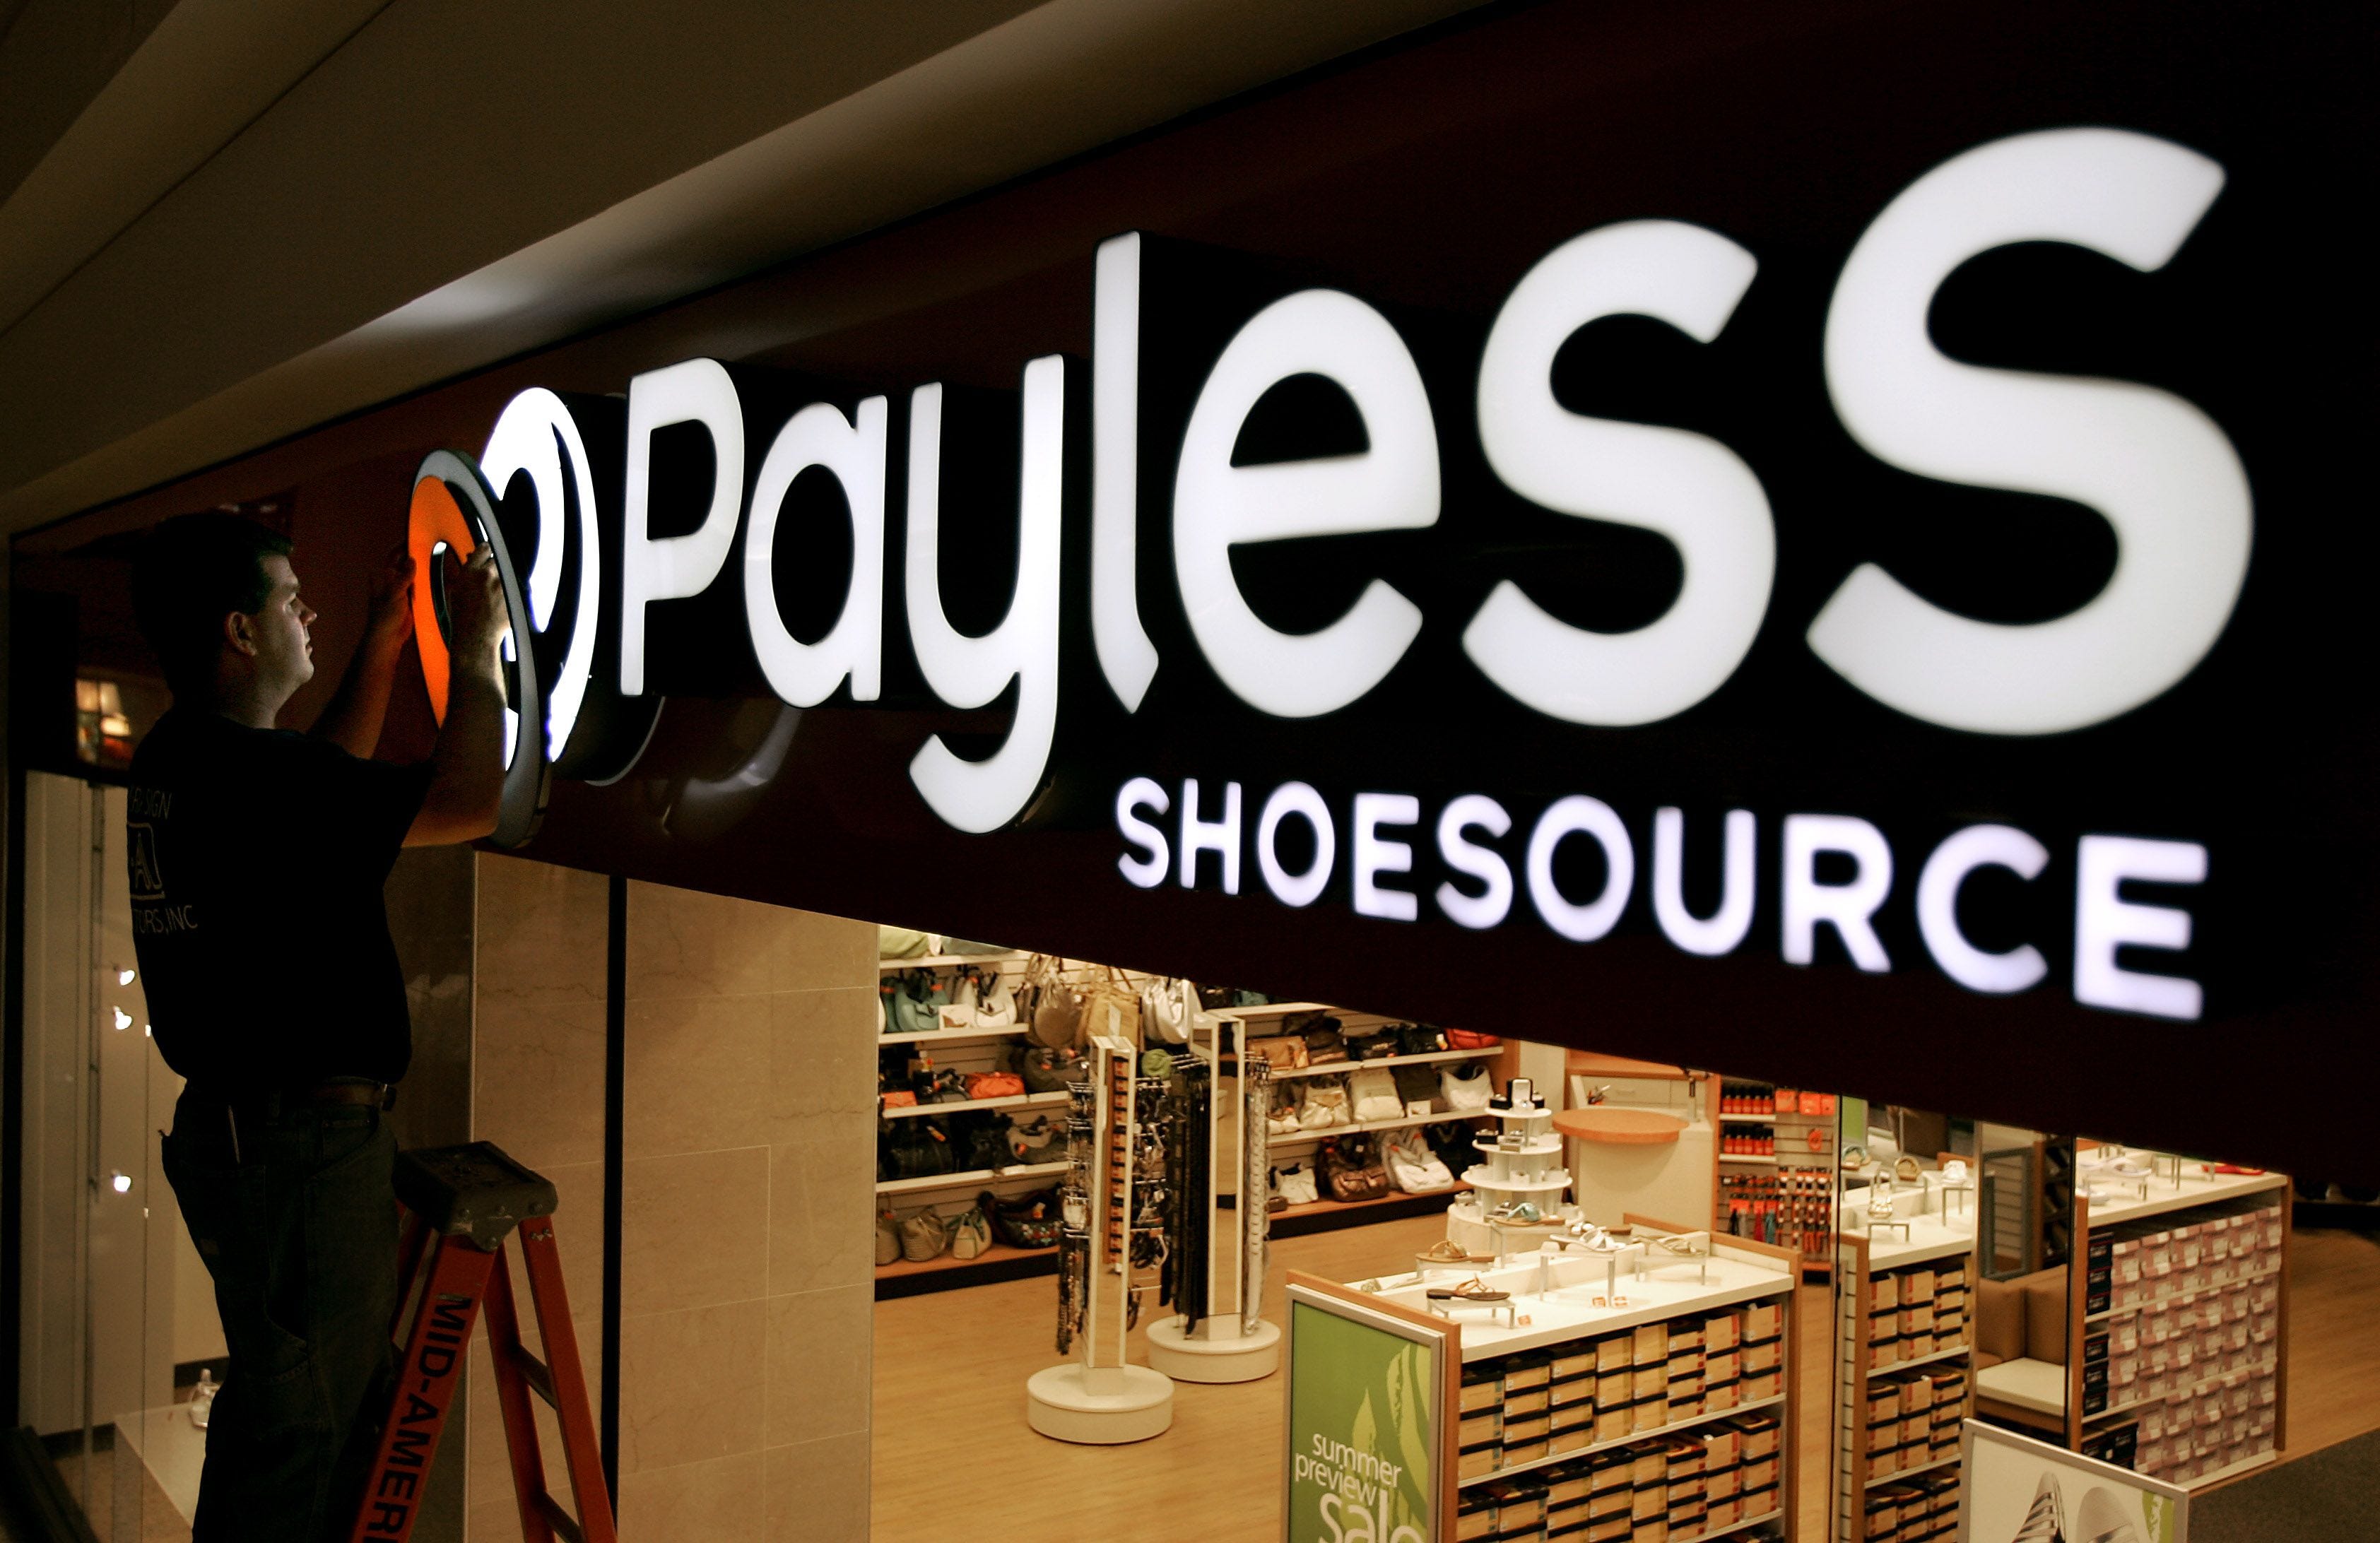 payless shoes near me